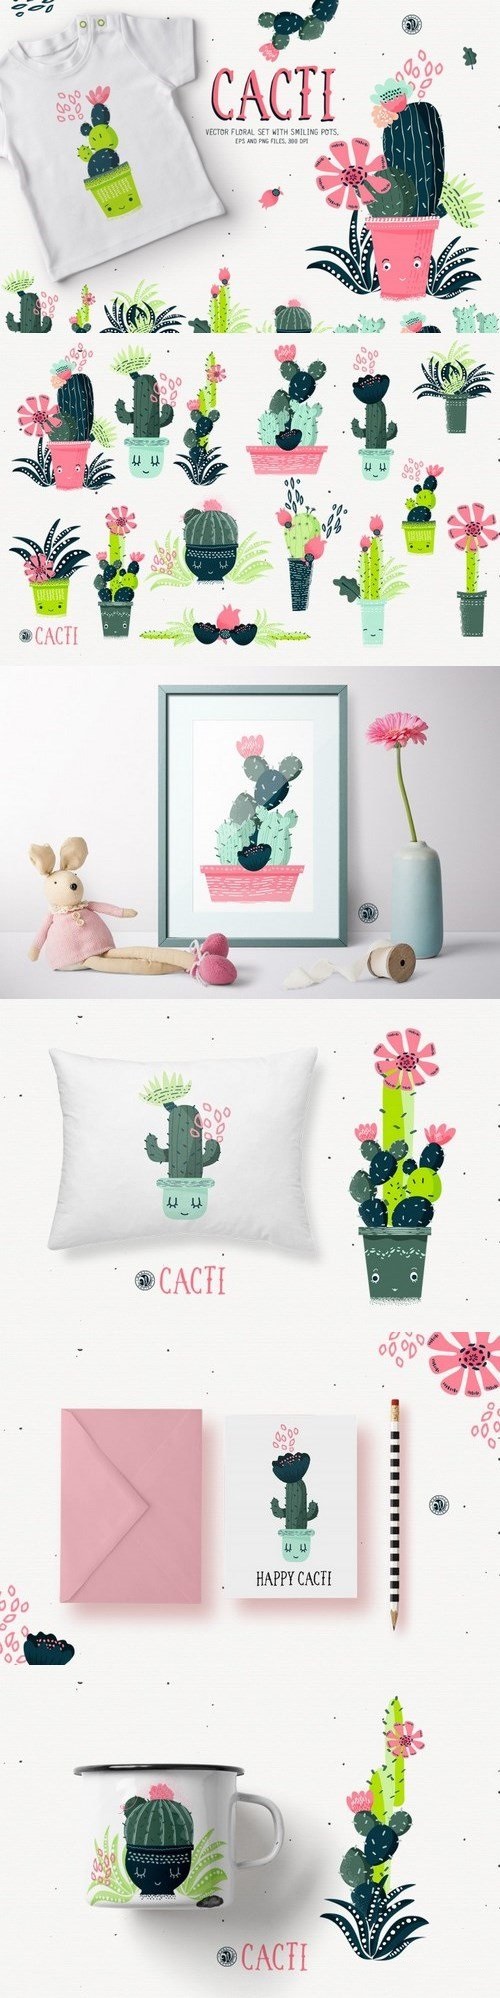 Cacti With Smiling Pots 1761126